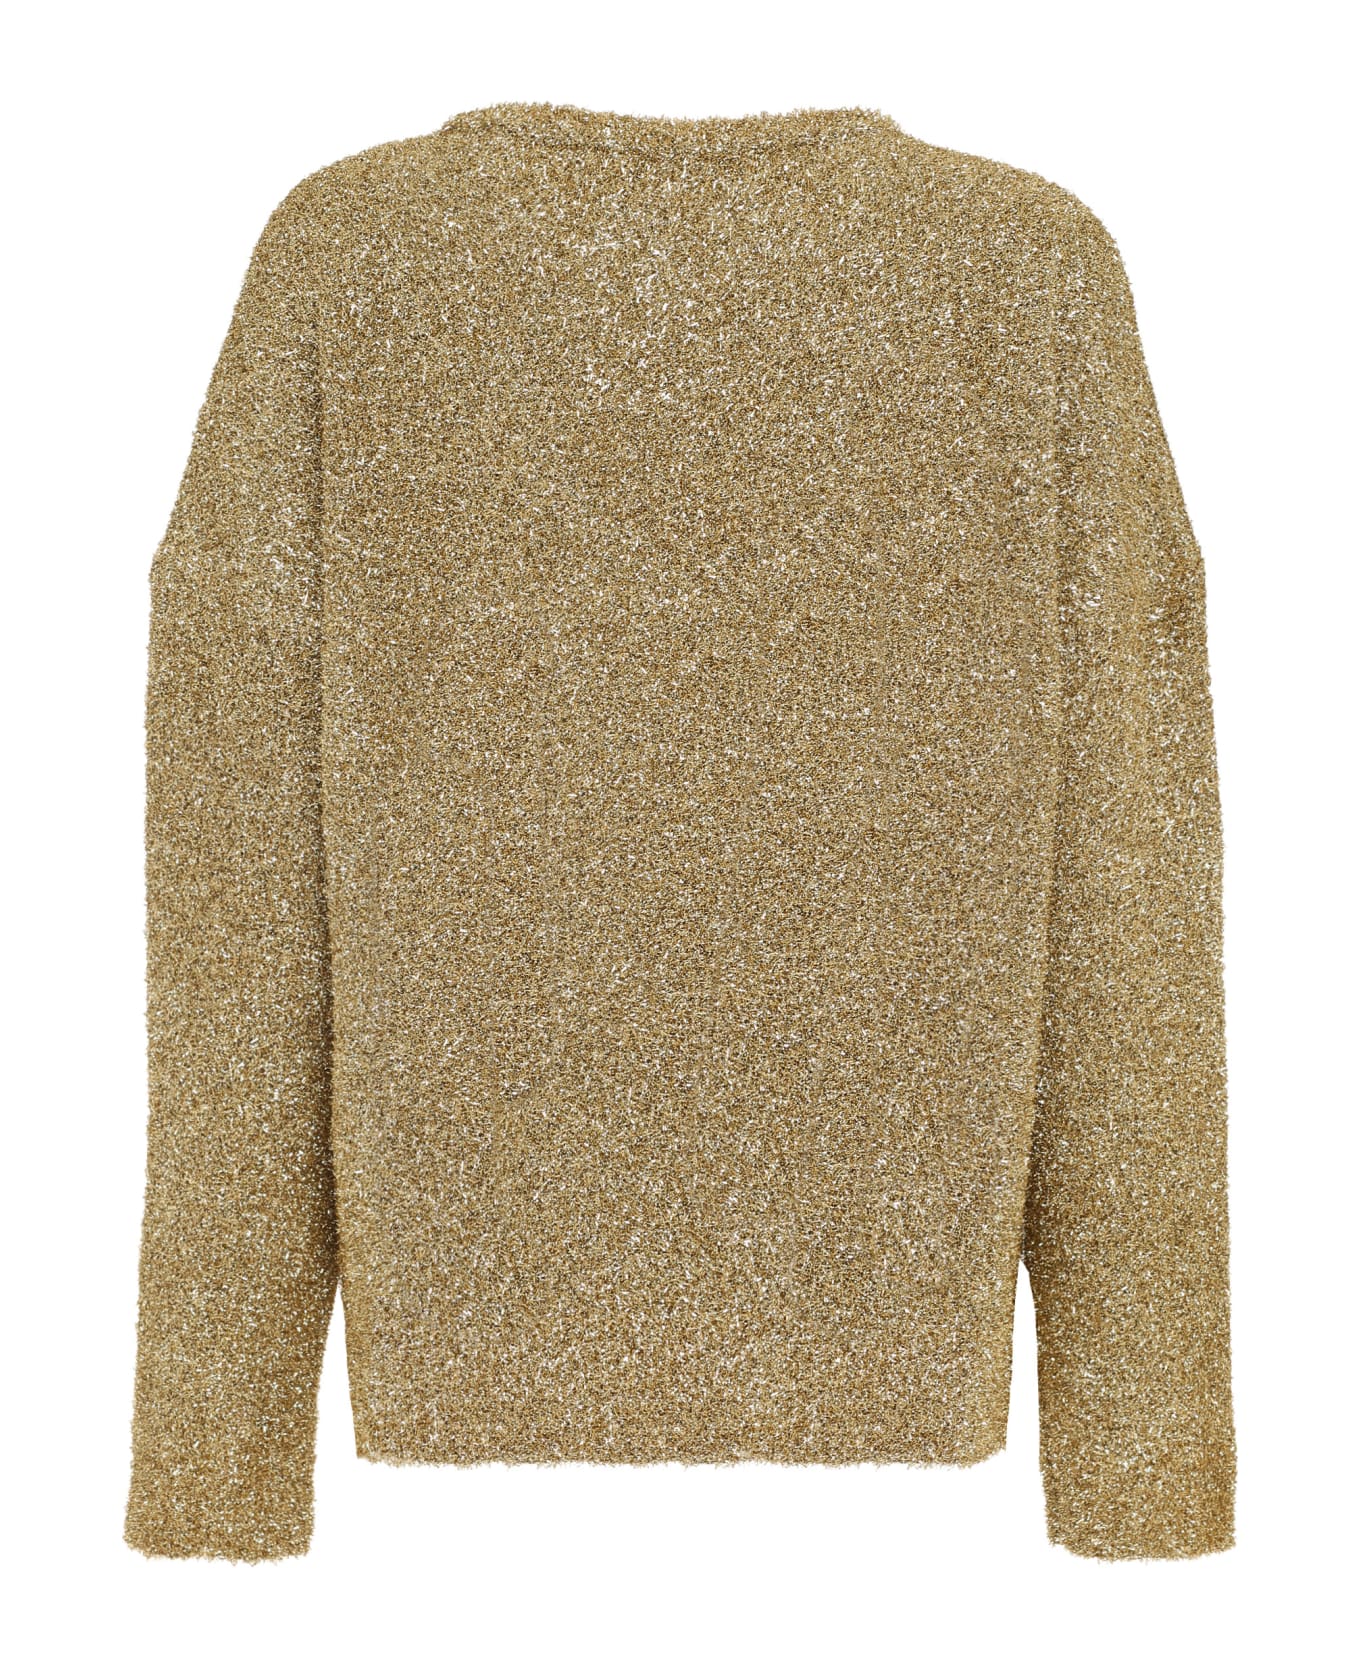 Paco Rabanne Long Sleeve Crew-neck Sweater - Gold